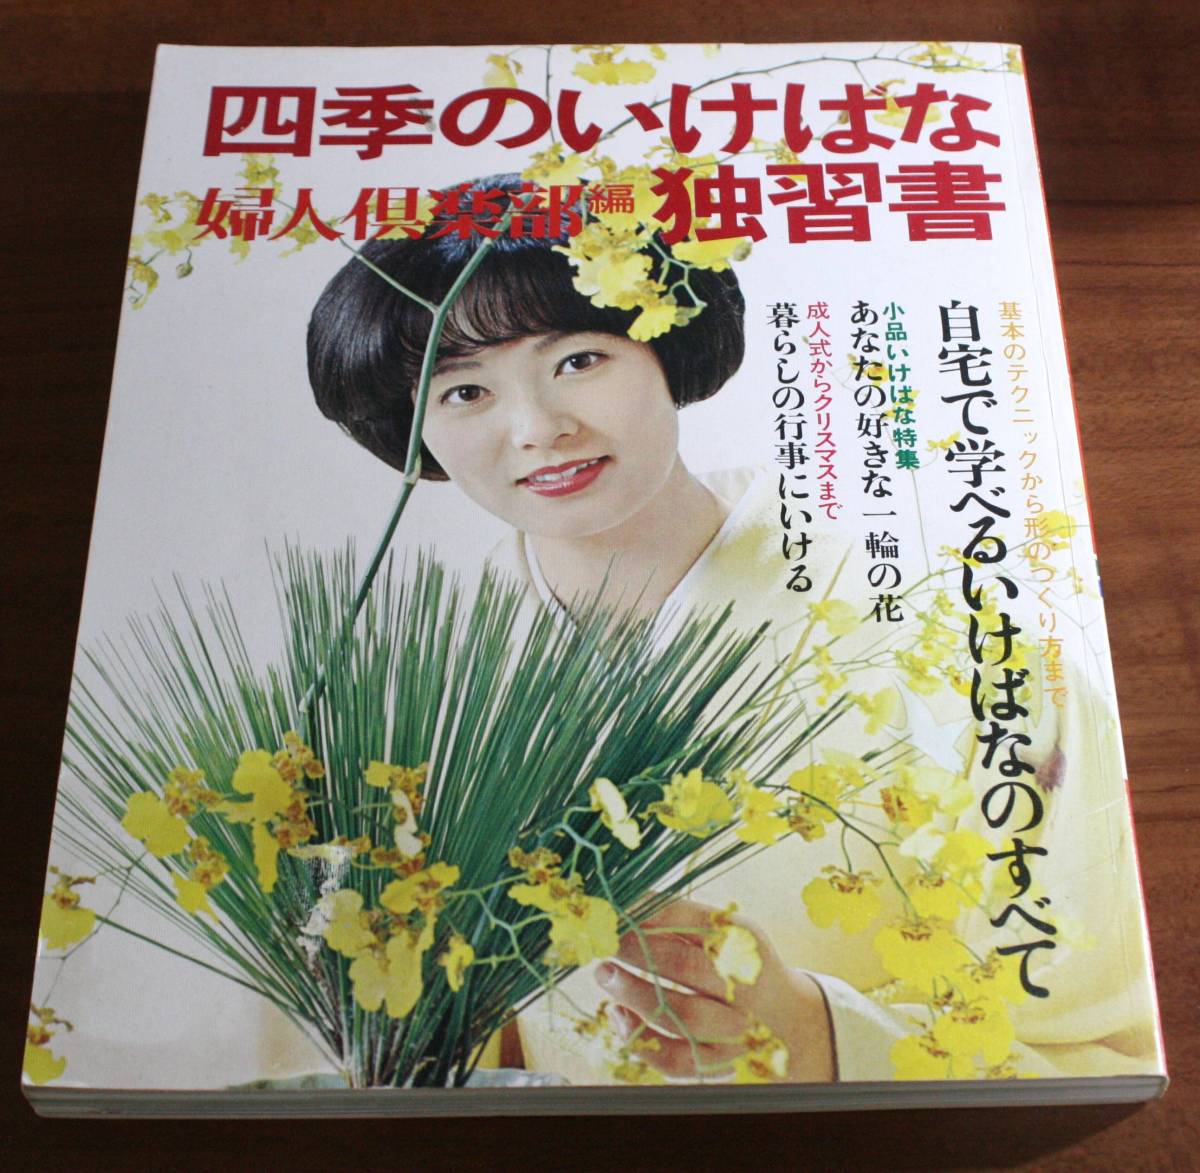 *73* four season. ...... paper woman club compilation cover island rice field .. secondhand book *